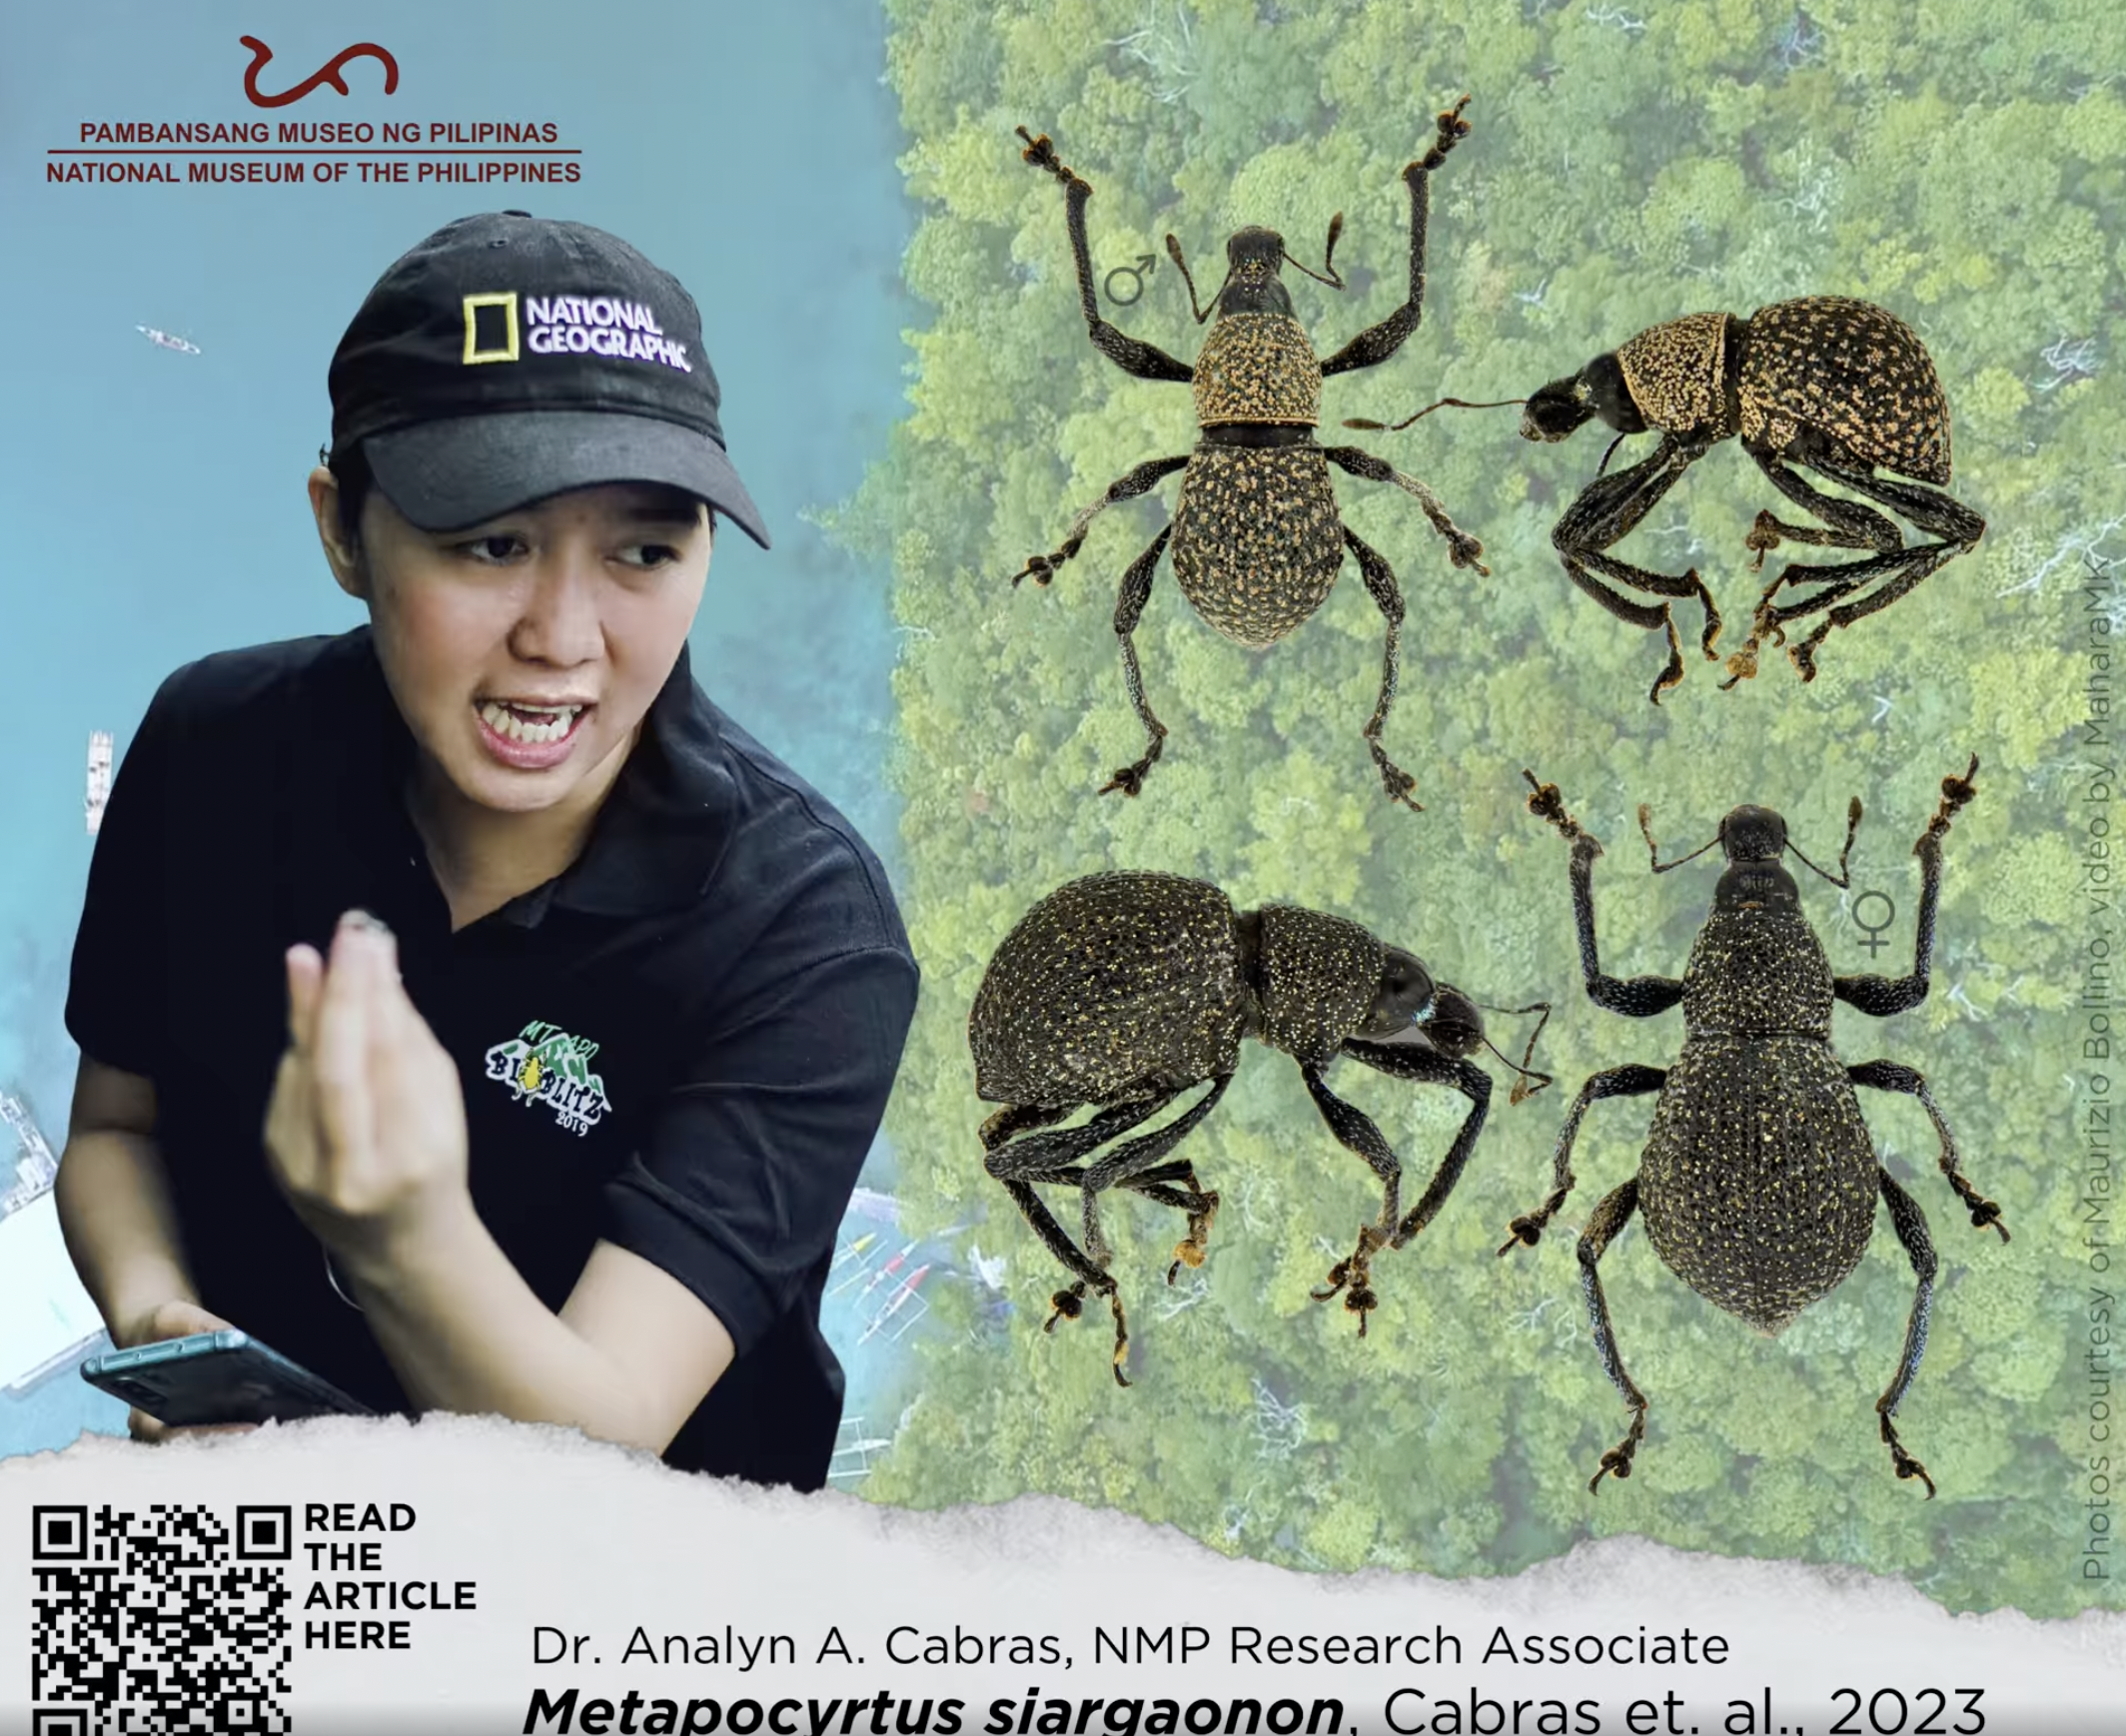 Researchers have conducted studies on a new species of beetle found in the Philippines more than three decades after its initial discovery.